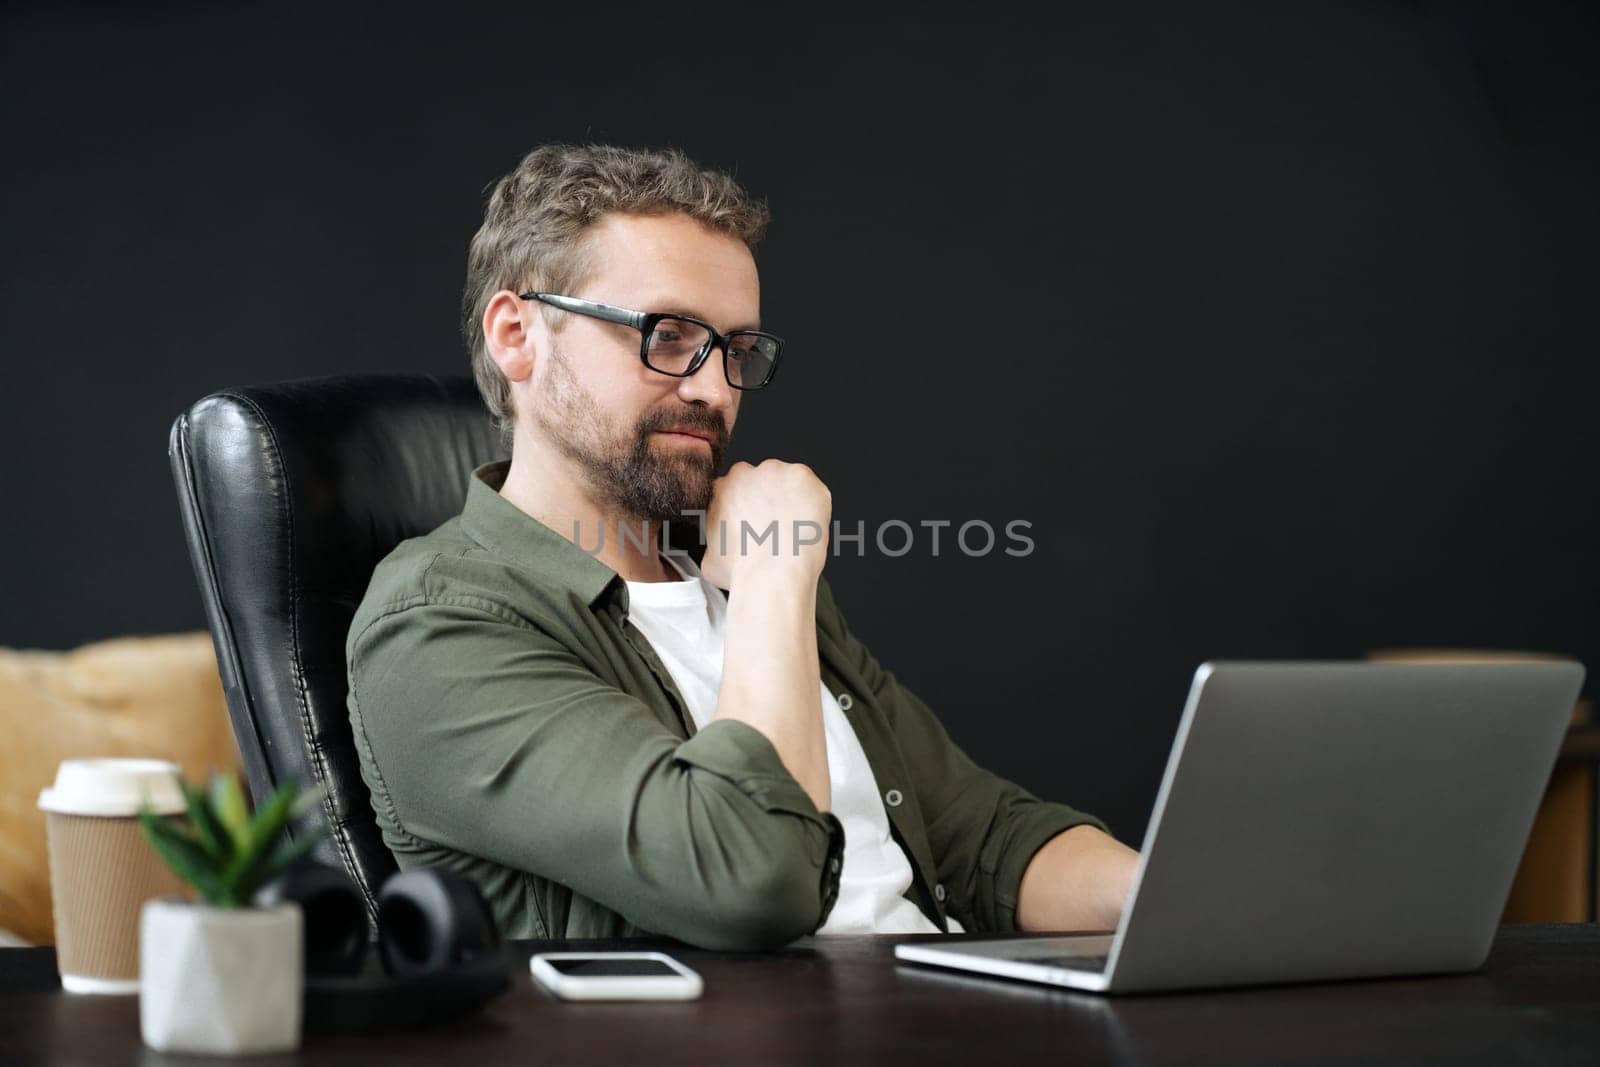 Wise, caucasian man captured in portrait, sitting at desk in home office. He appearing thoughtful, as he works on computer. Sense of professionalism and productivity in a home work environment. High quality photo